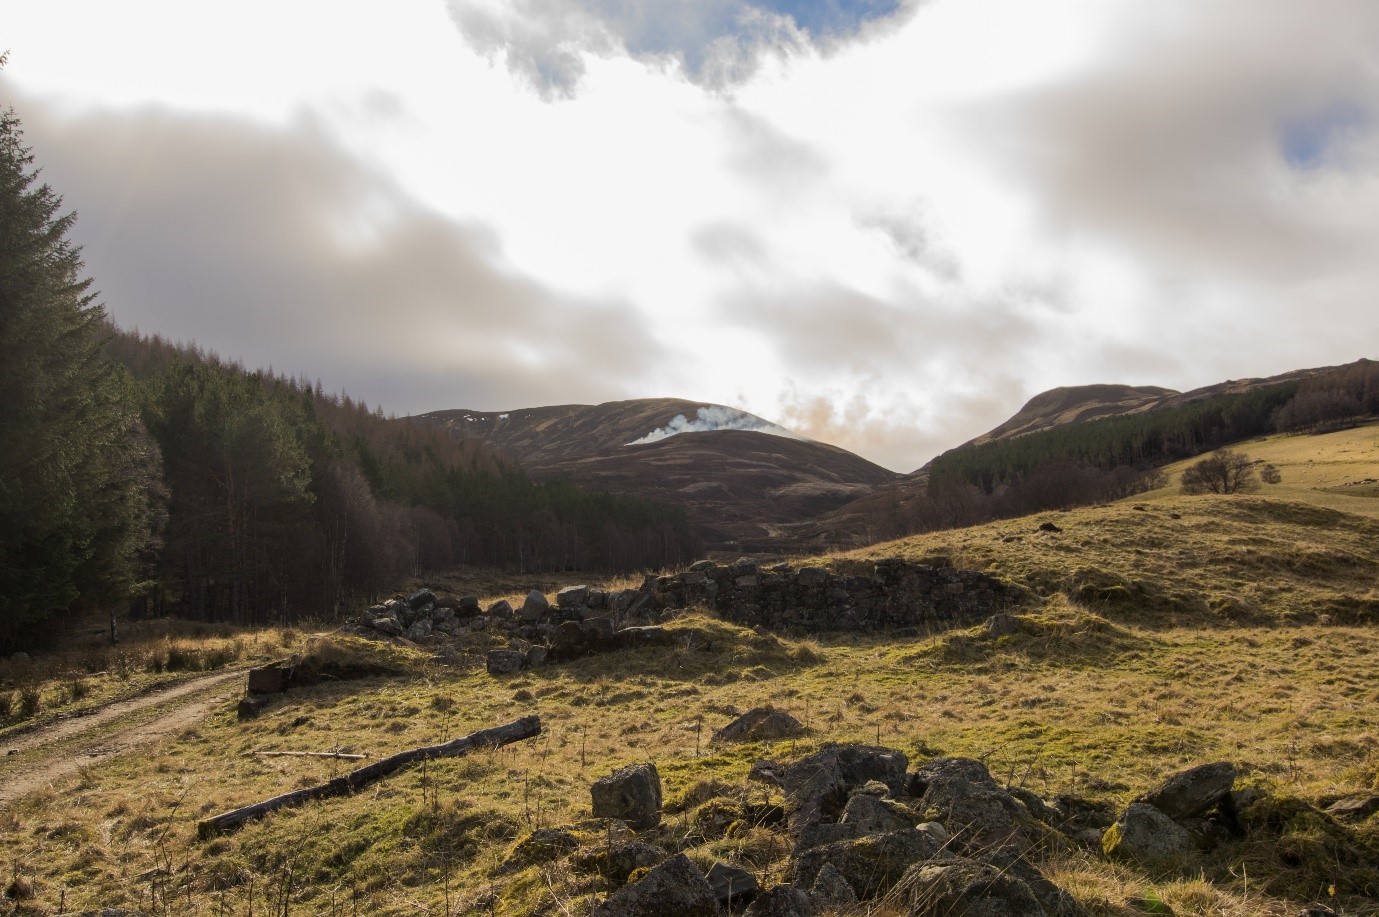 Fires in the Scottish Uplands and their future impacts on ecosystem services